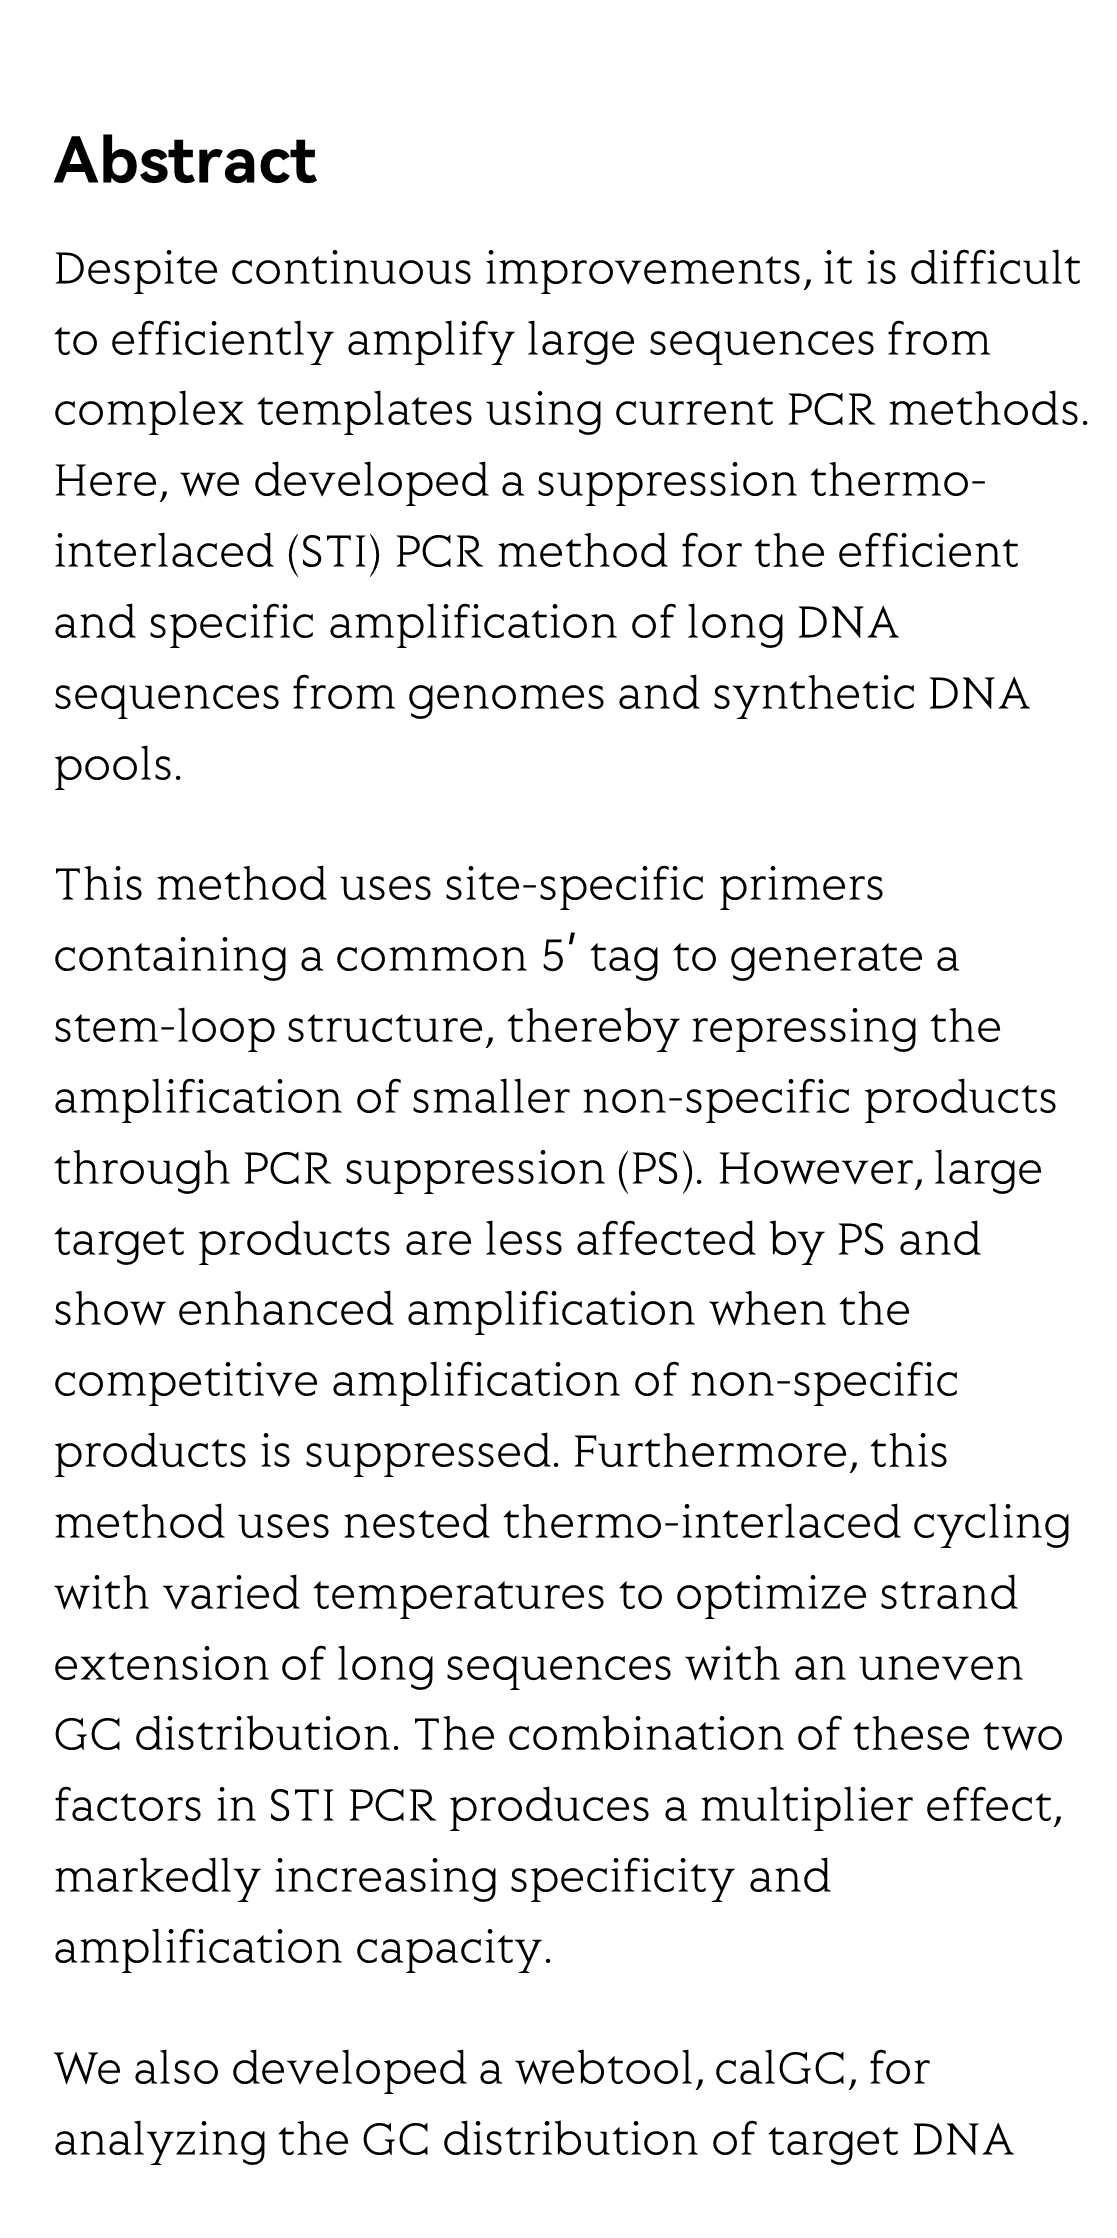 STI PCR: An efficient method for amplification and de novo synthesis of long DNA sequences_2